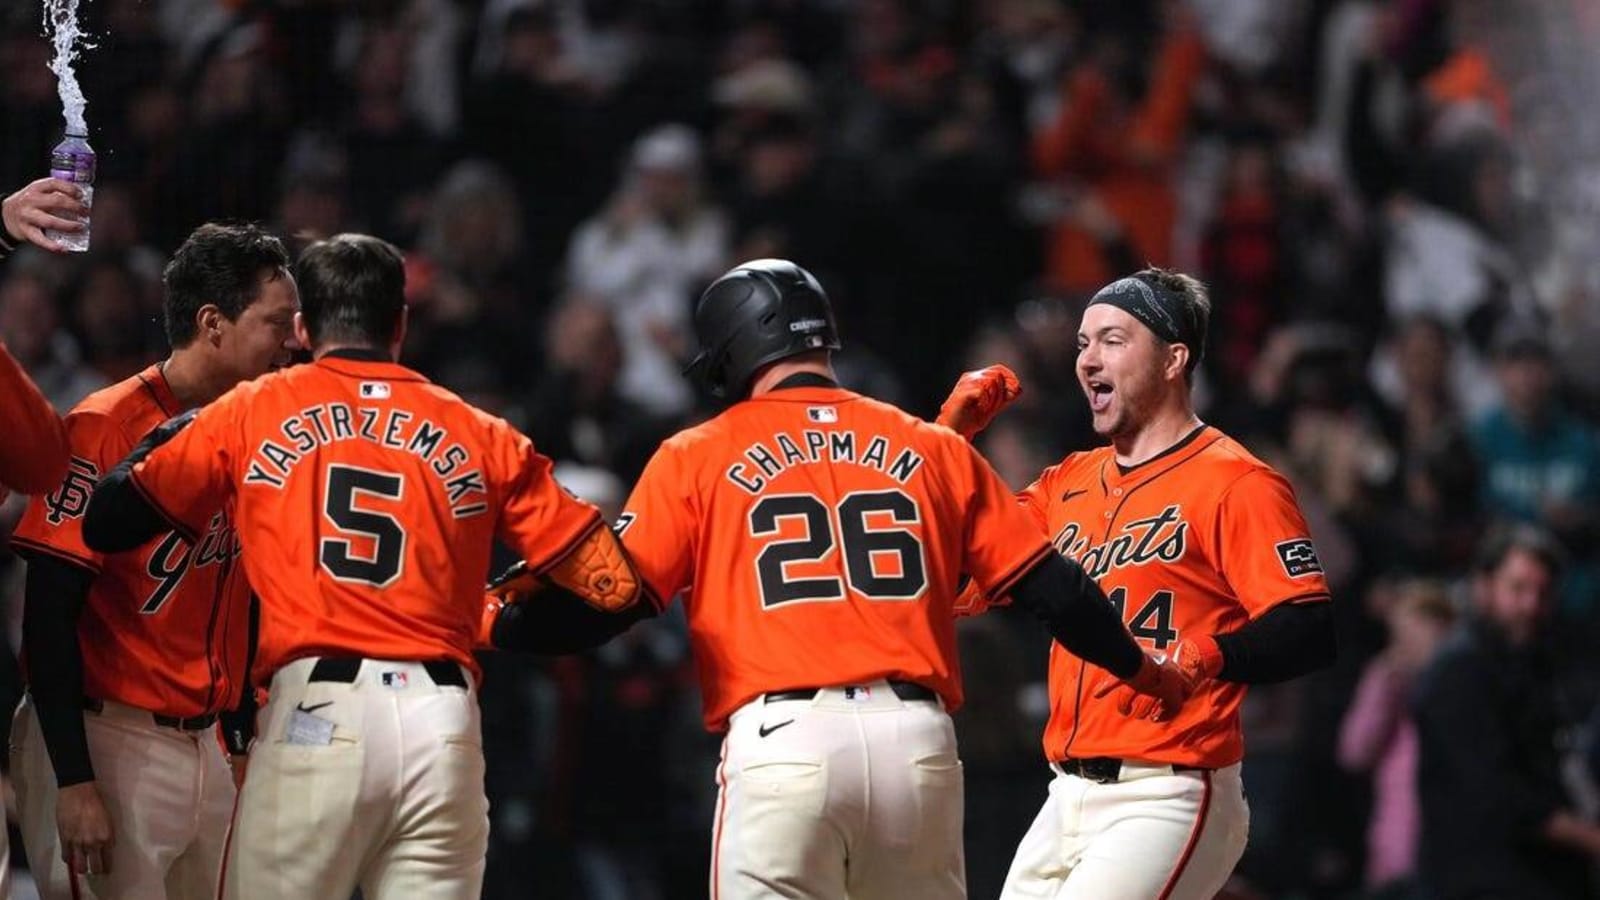 Giants&#39; Patrick Bailey beats Pirates with walk-off homer